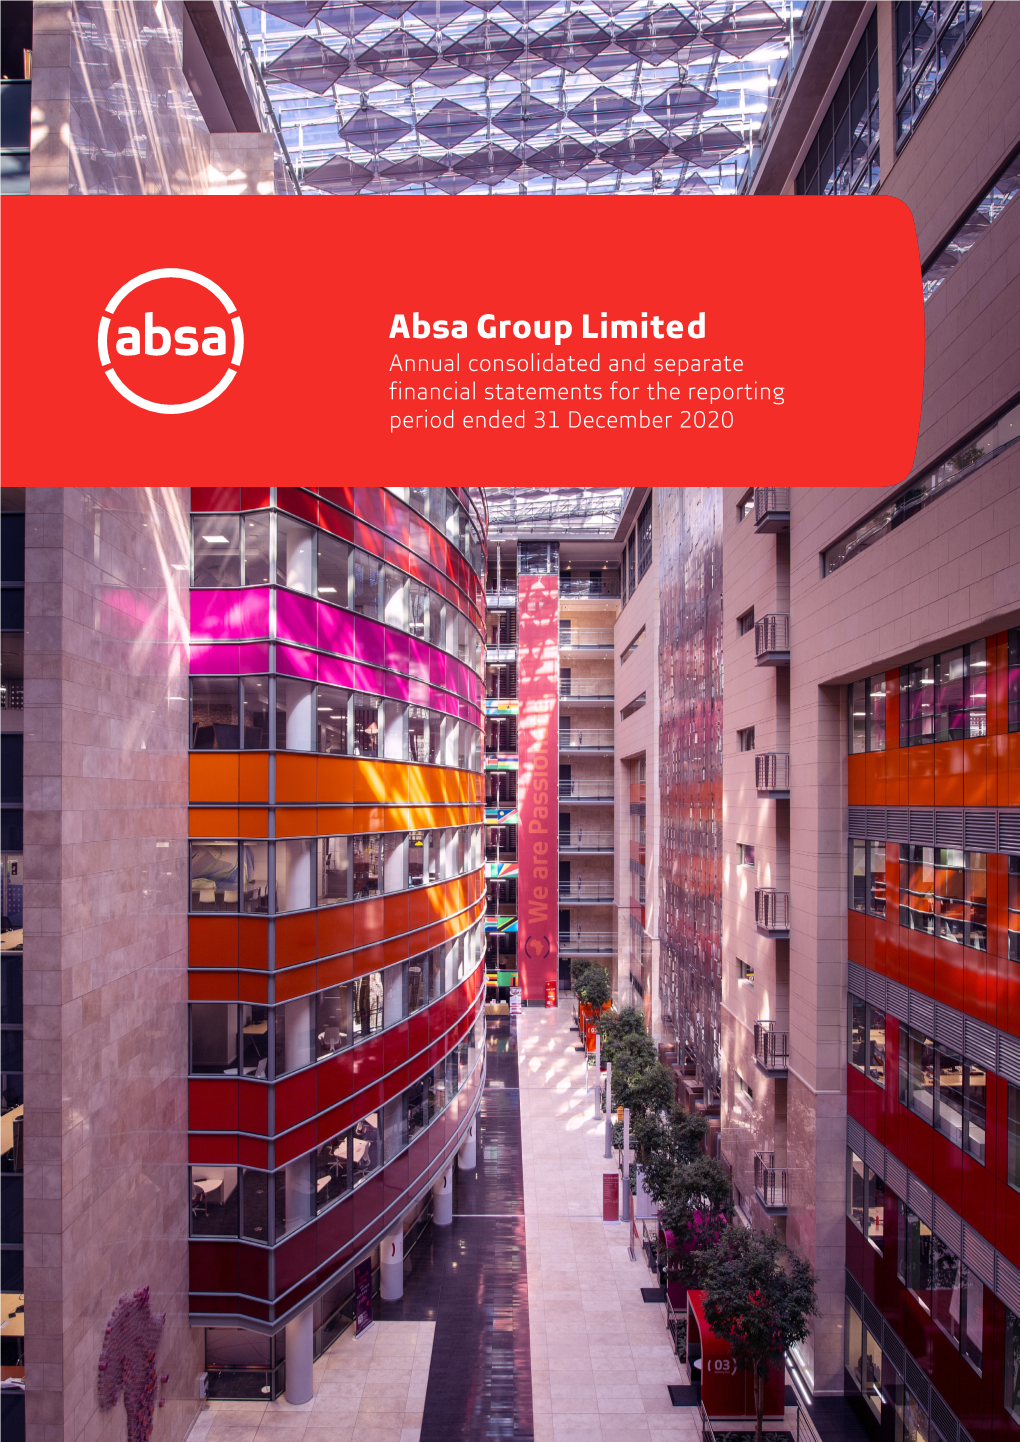 Absa Group Limited Annual Consolidated and Separate Financial Statements for the Reporting Period Ended 31 December 2020 Contents